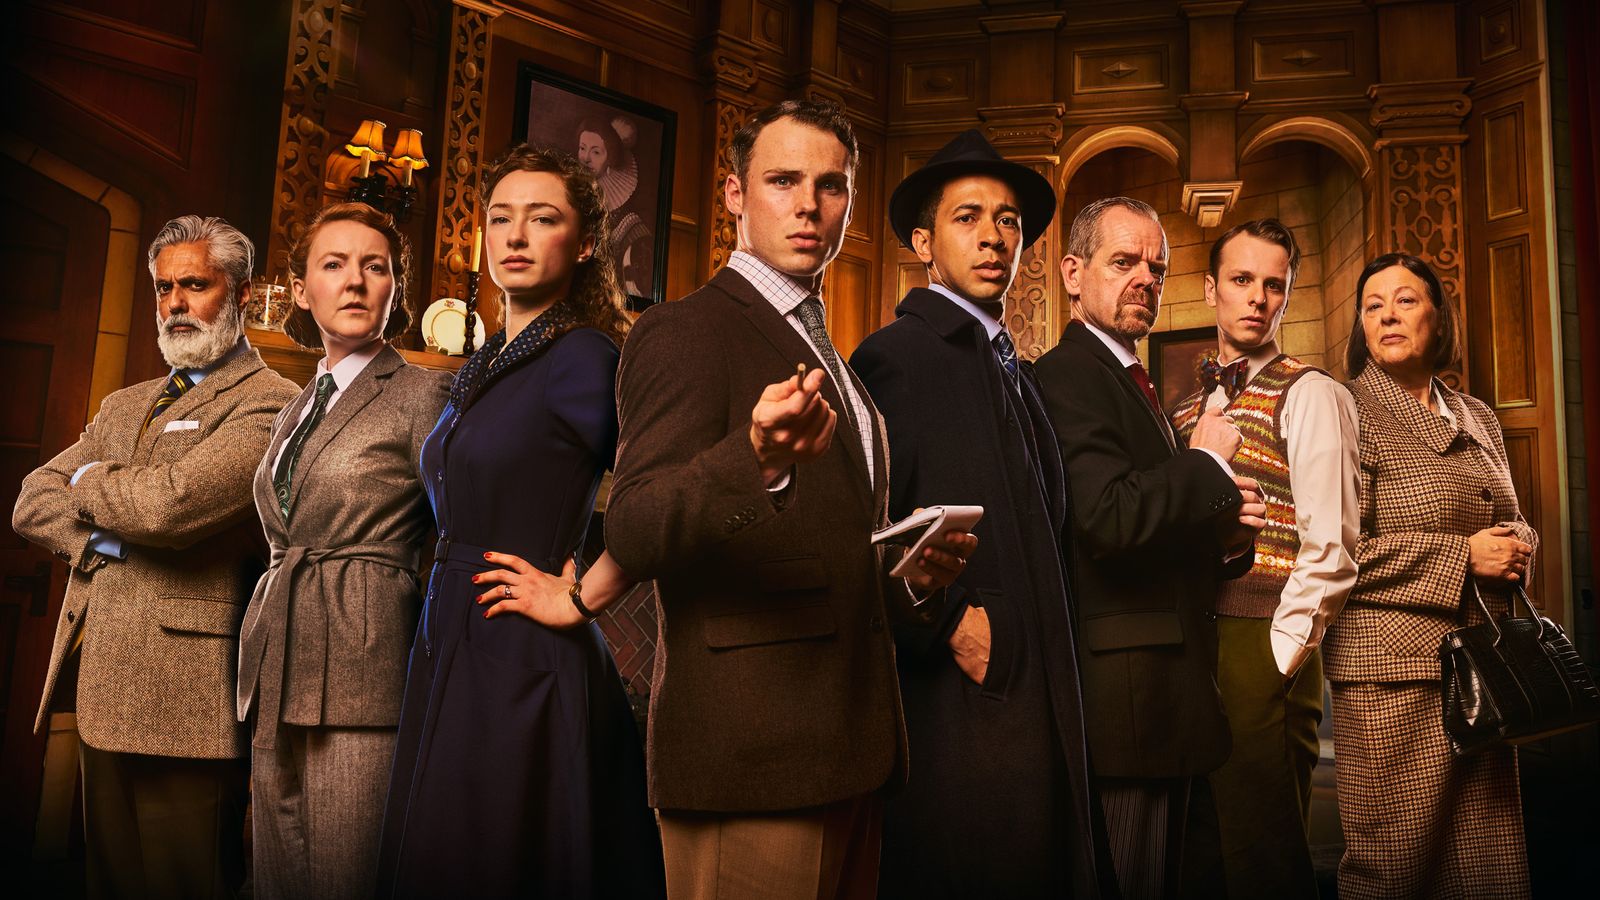 Agatha Christie's legendary whodunnit The Mousetrap to make New York debut after 70 years